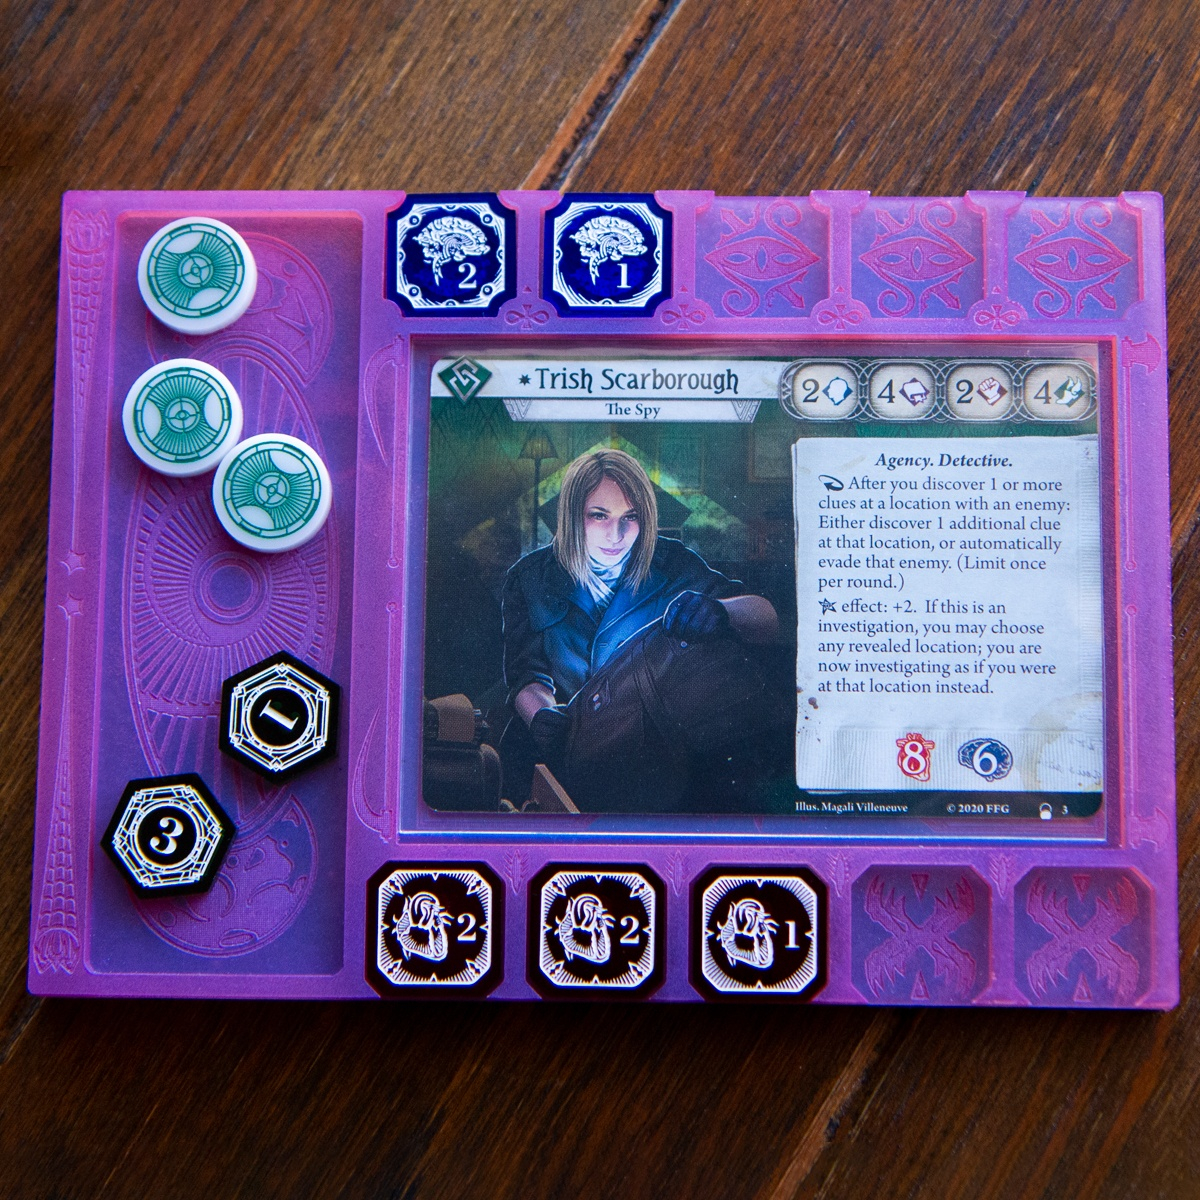 Dream Mythos Board at a neutral angle with the Clue/Resource holder on the left side demonstrating its usability in both right and left handed positions.  A few tokens from the Investigator Mythos Set are slotted in there places and the Arkham Horror LCG investigator, Trish Scarborough is resting in the card holder section